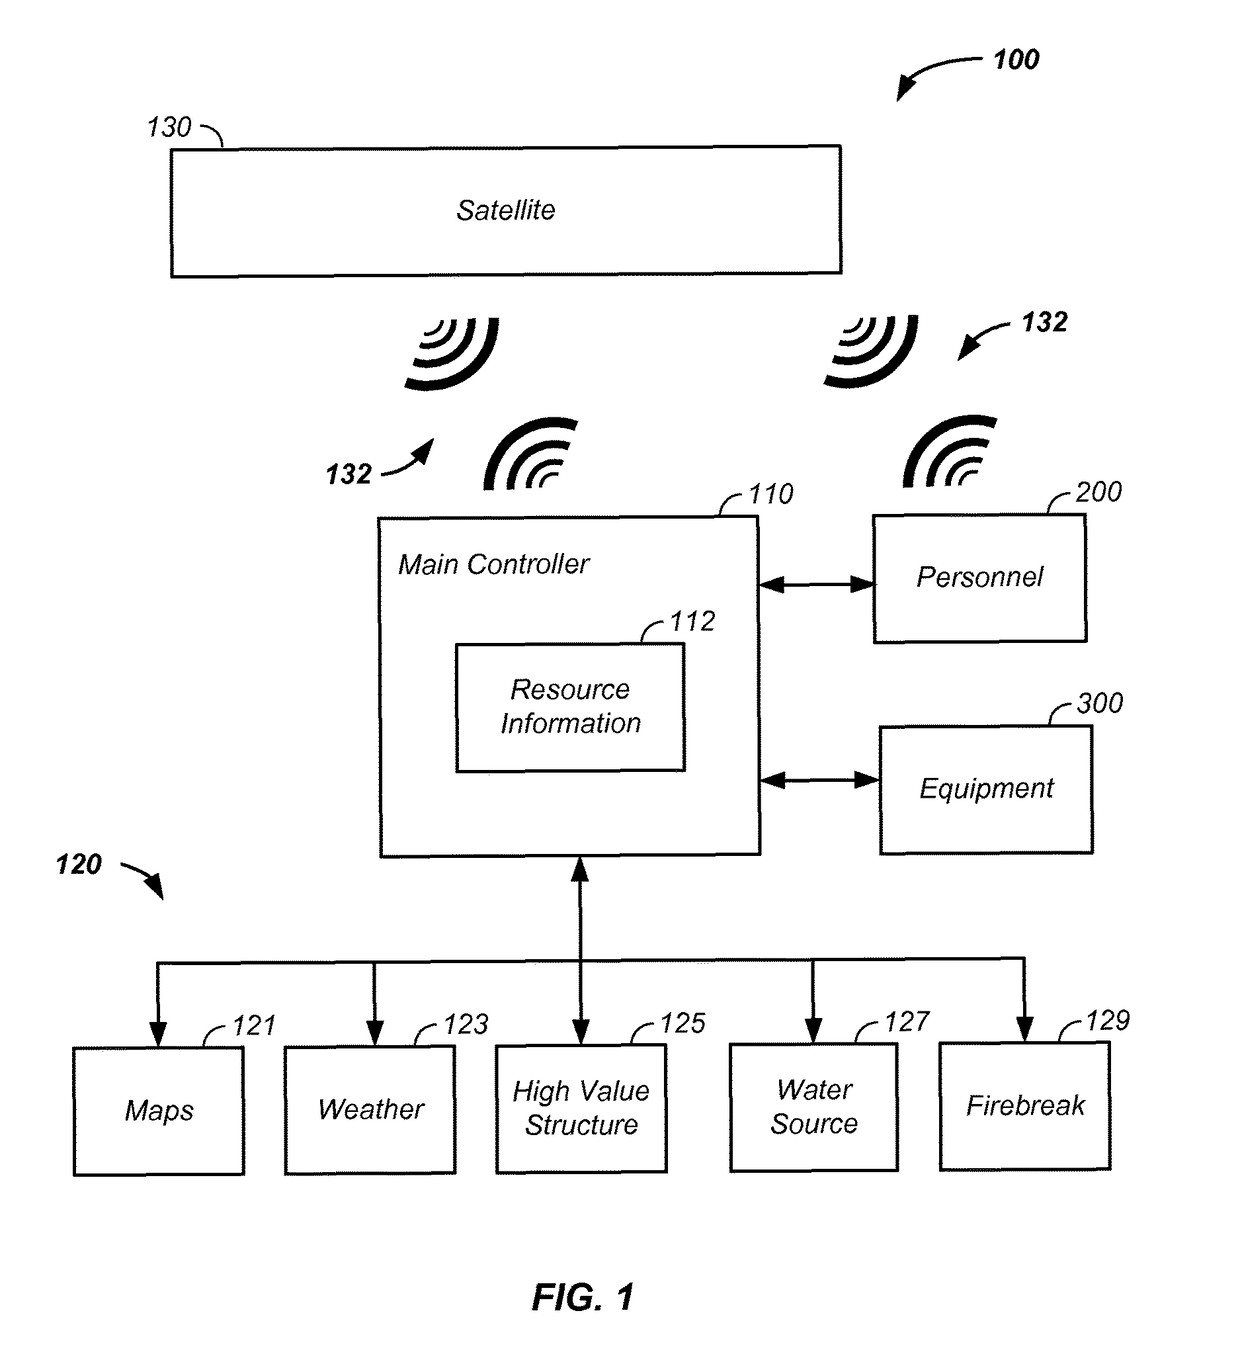 Firefighting resource identification/icon communication linking apparatus and method of use thereof